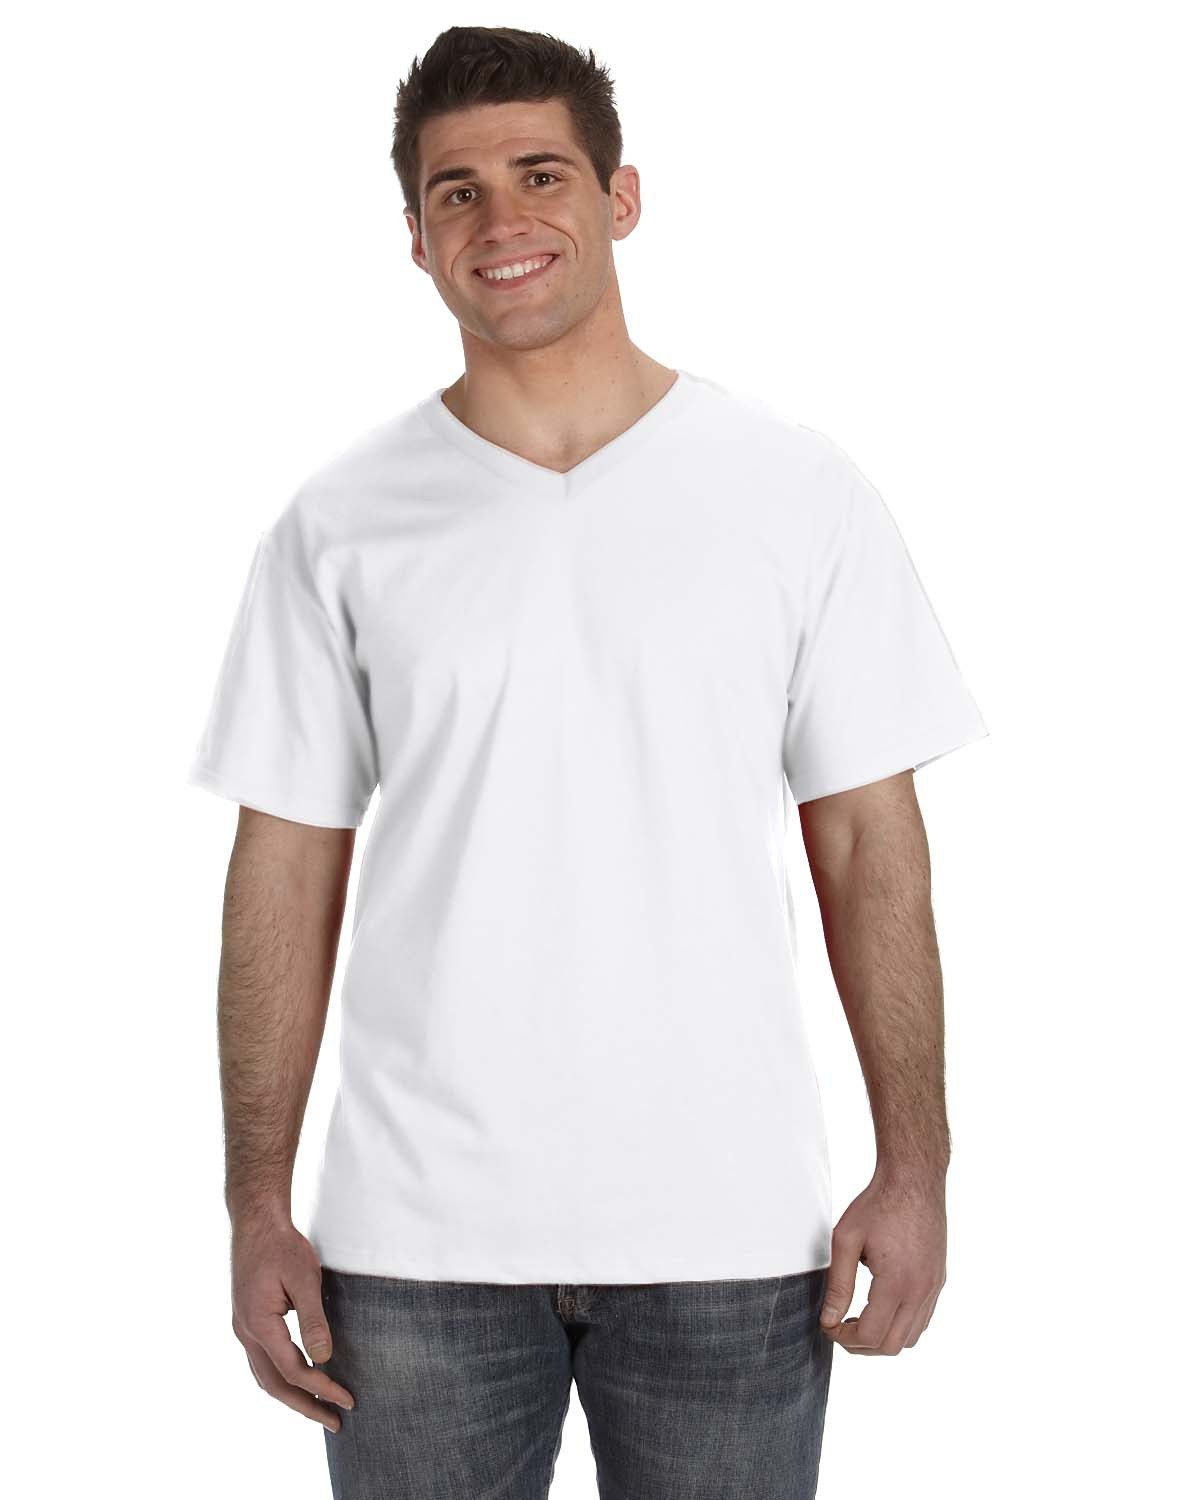 Fruit of the Loom Adult HD Cotton™ V-Neck T-Shirt WHITE 